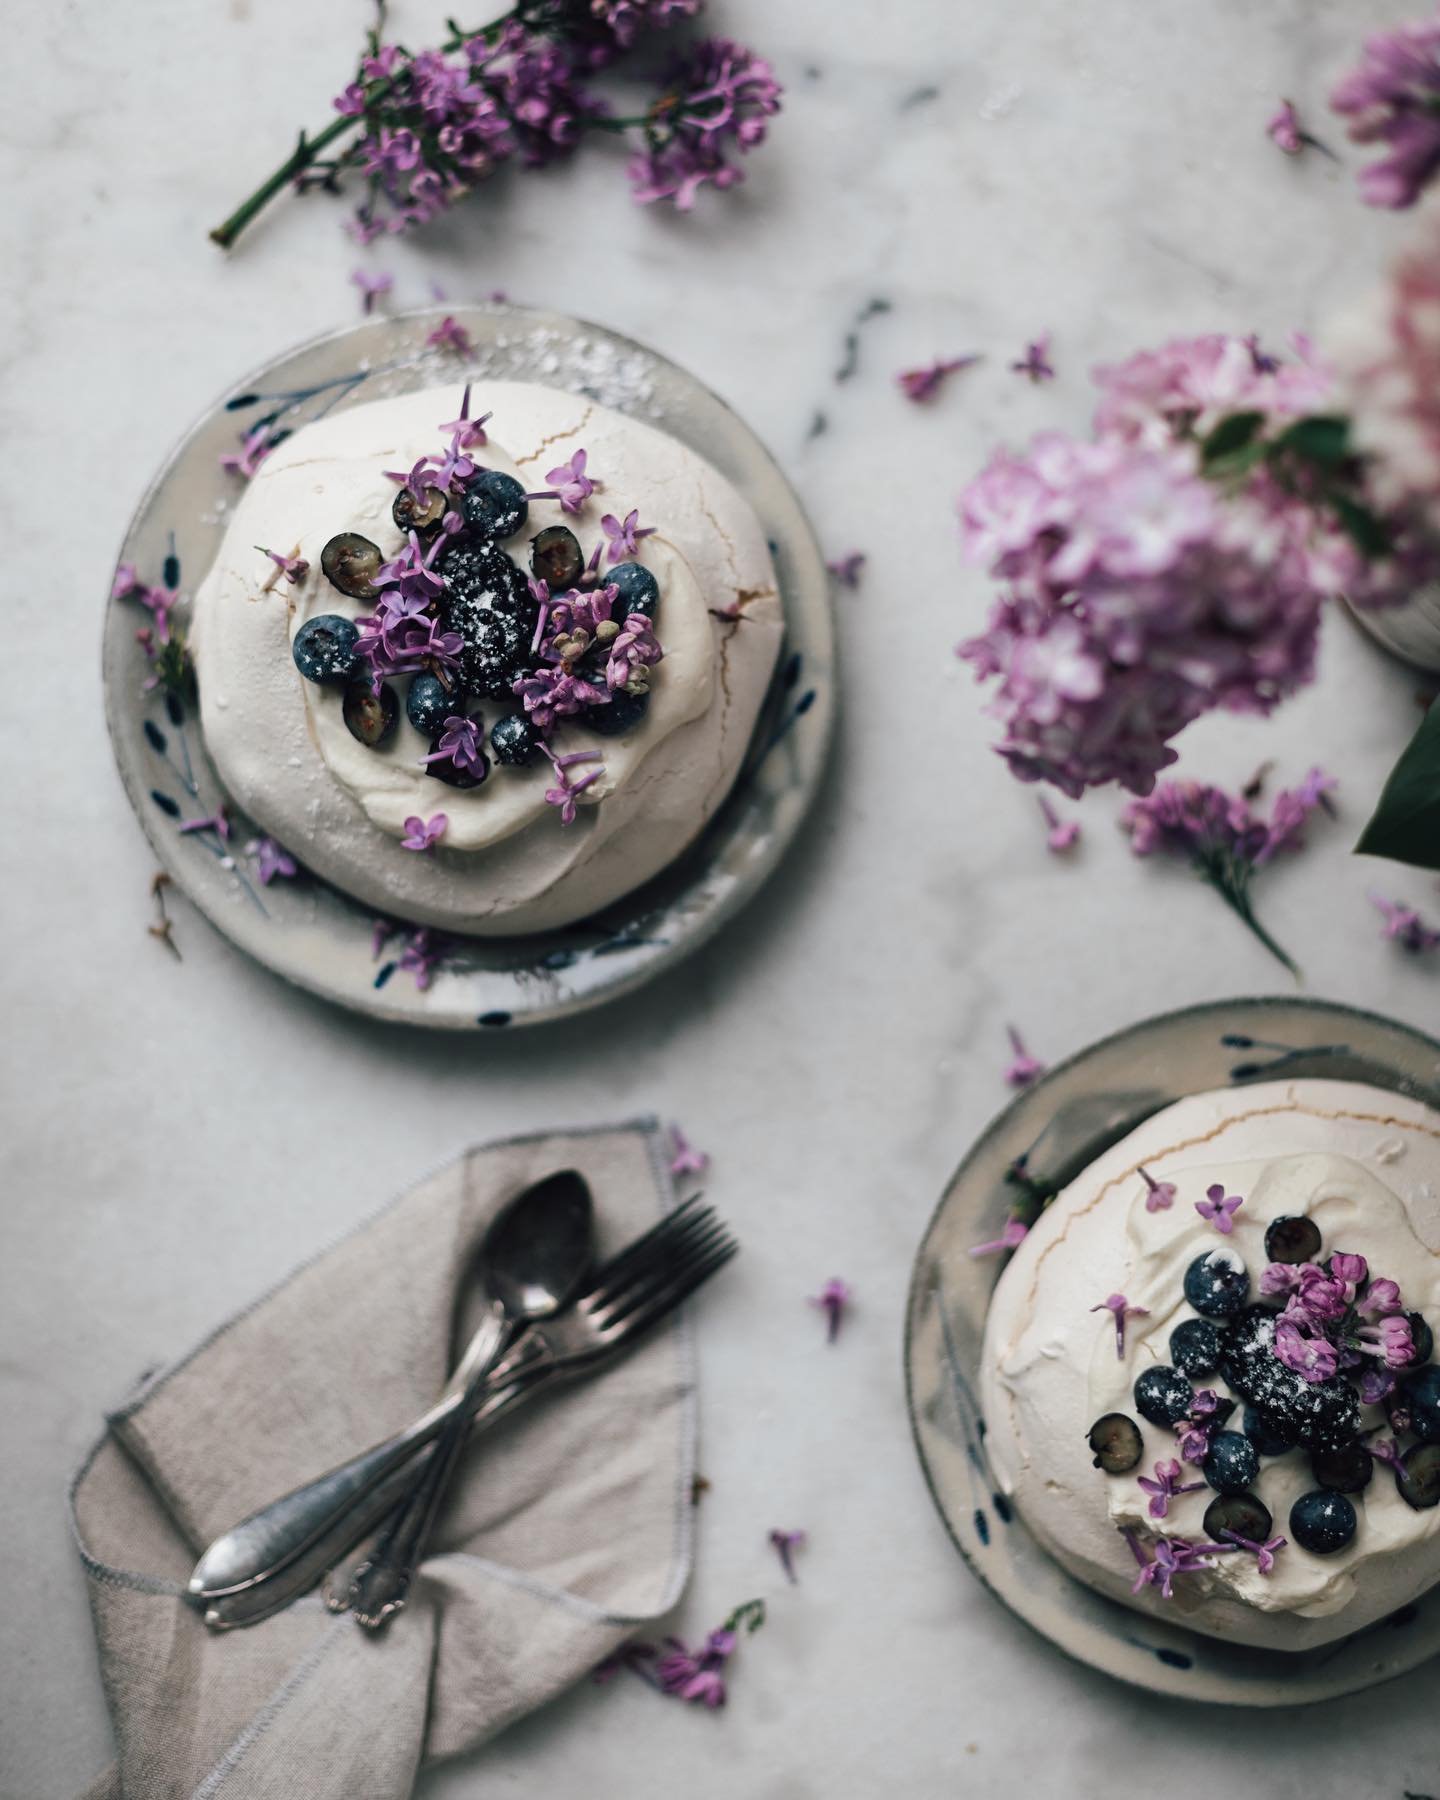 Lilac blueberries mini pavlovas I made for a pretty special occasion some time ago (poke @legreenstudio 🤍). Was told it&rsquo;s very @linda_lomelino which I take as a compliment especially when I actually take her pavlova recipe as a starting point 